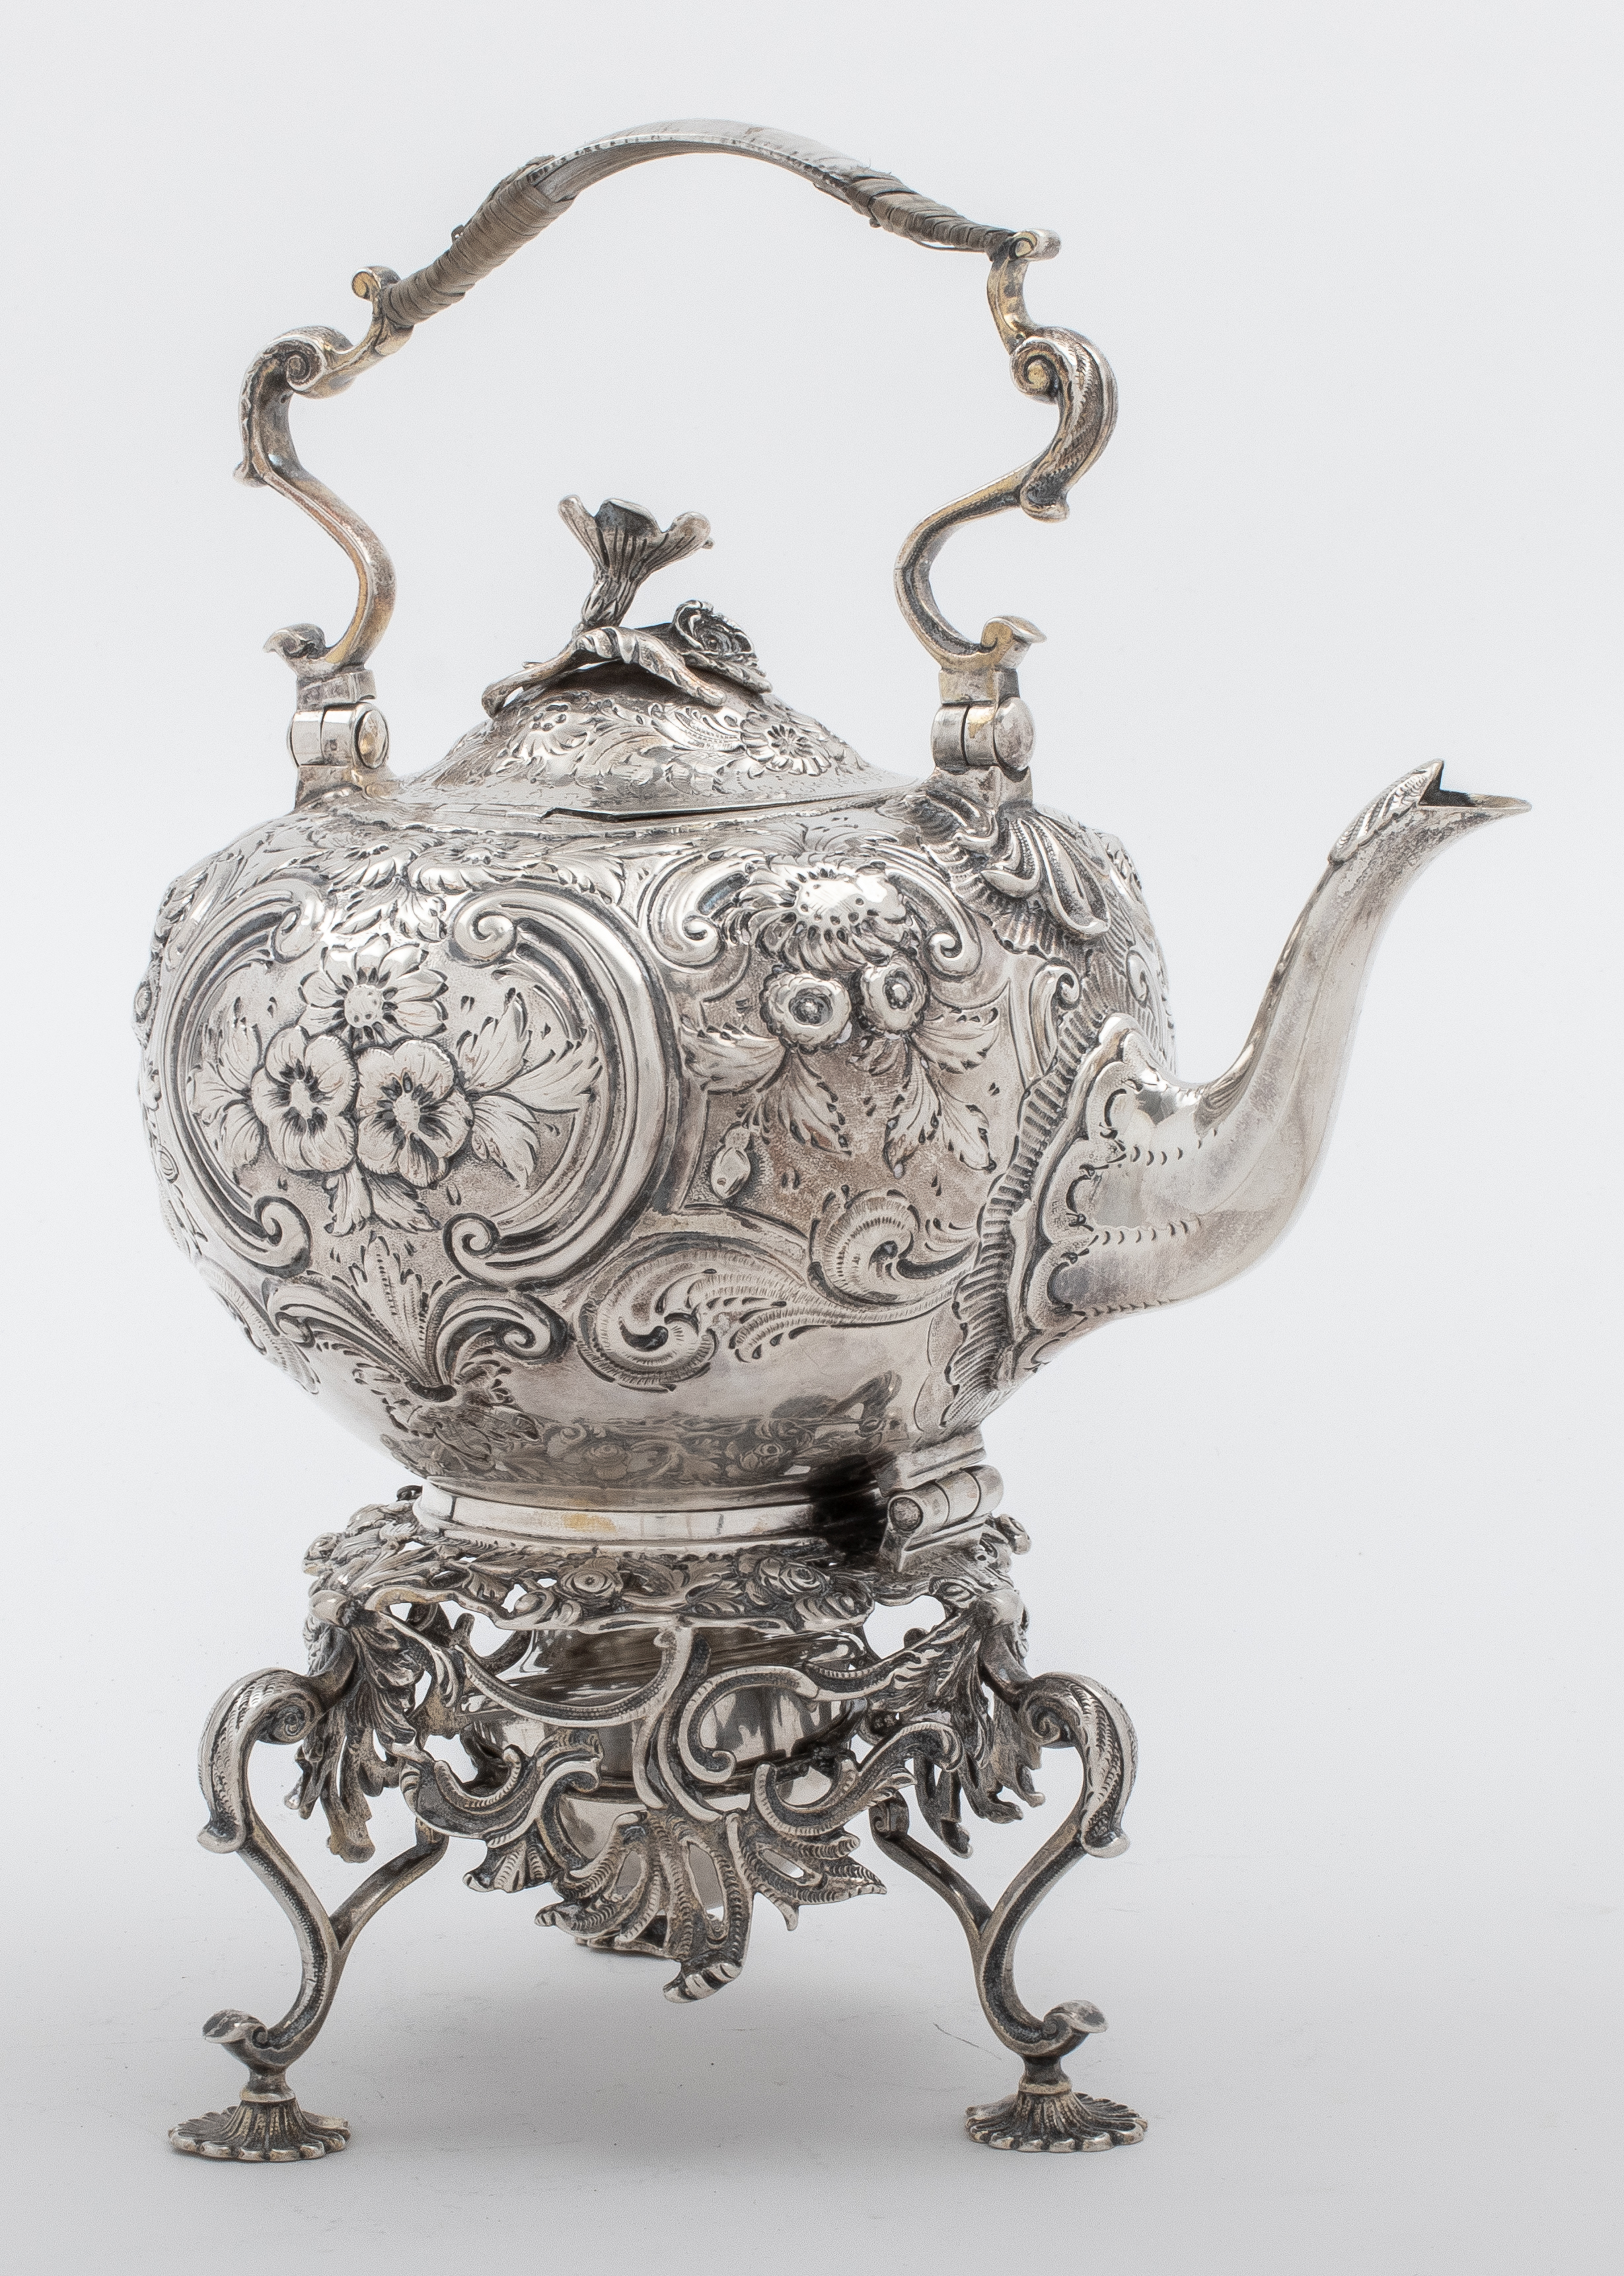  George III sterling silver kettle on stand, est. $1,000-$2,000